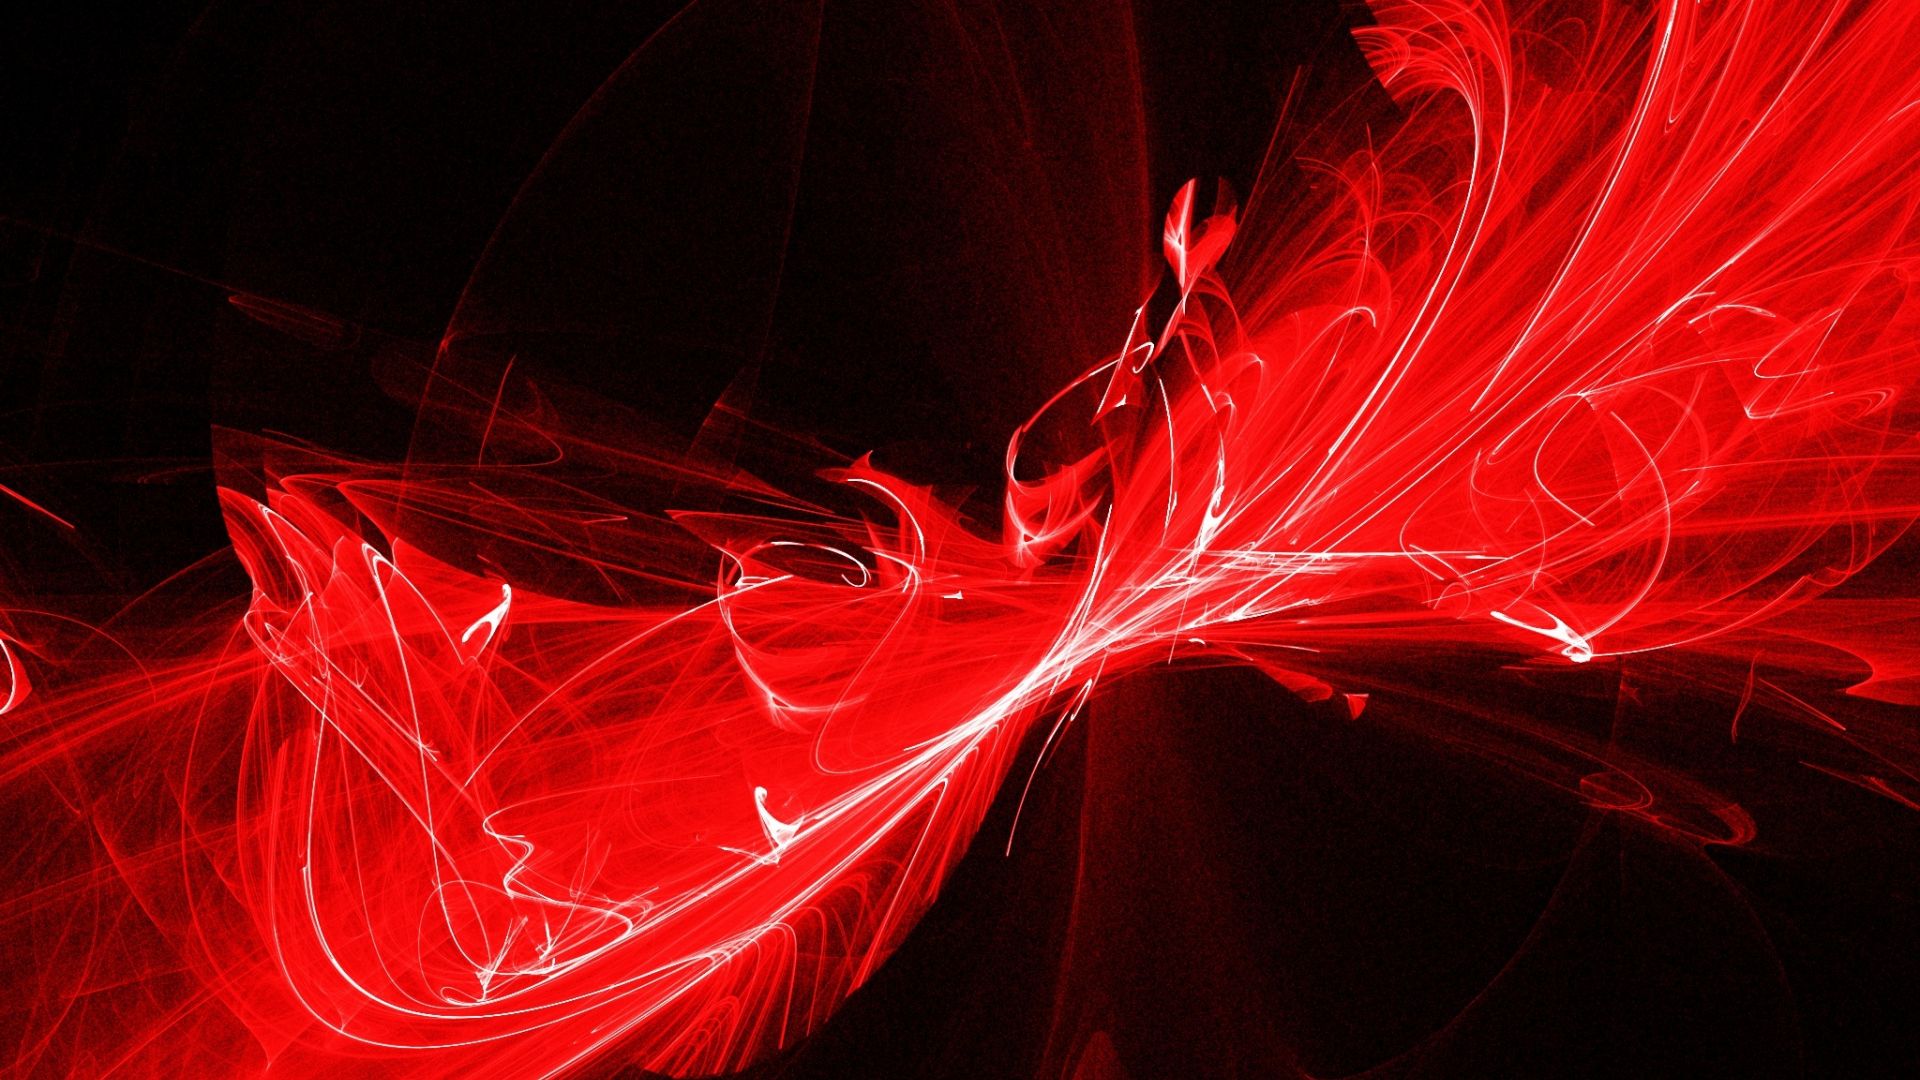 Desktop Wallpaper Red, Abstract, Glow, Hd Image, Picture, Background, Nzyvux